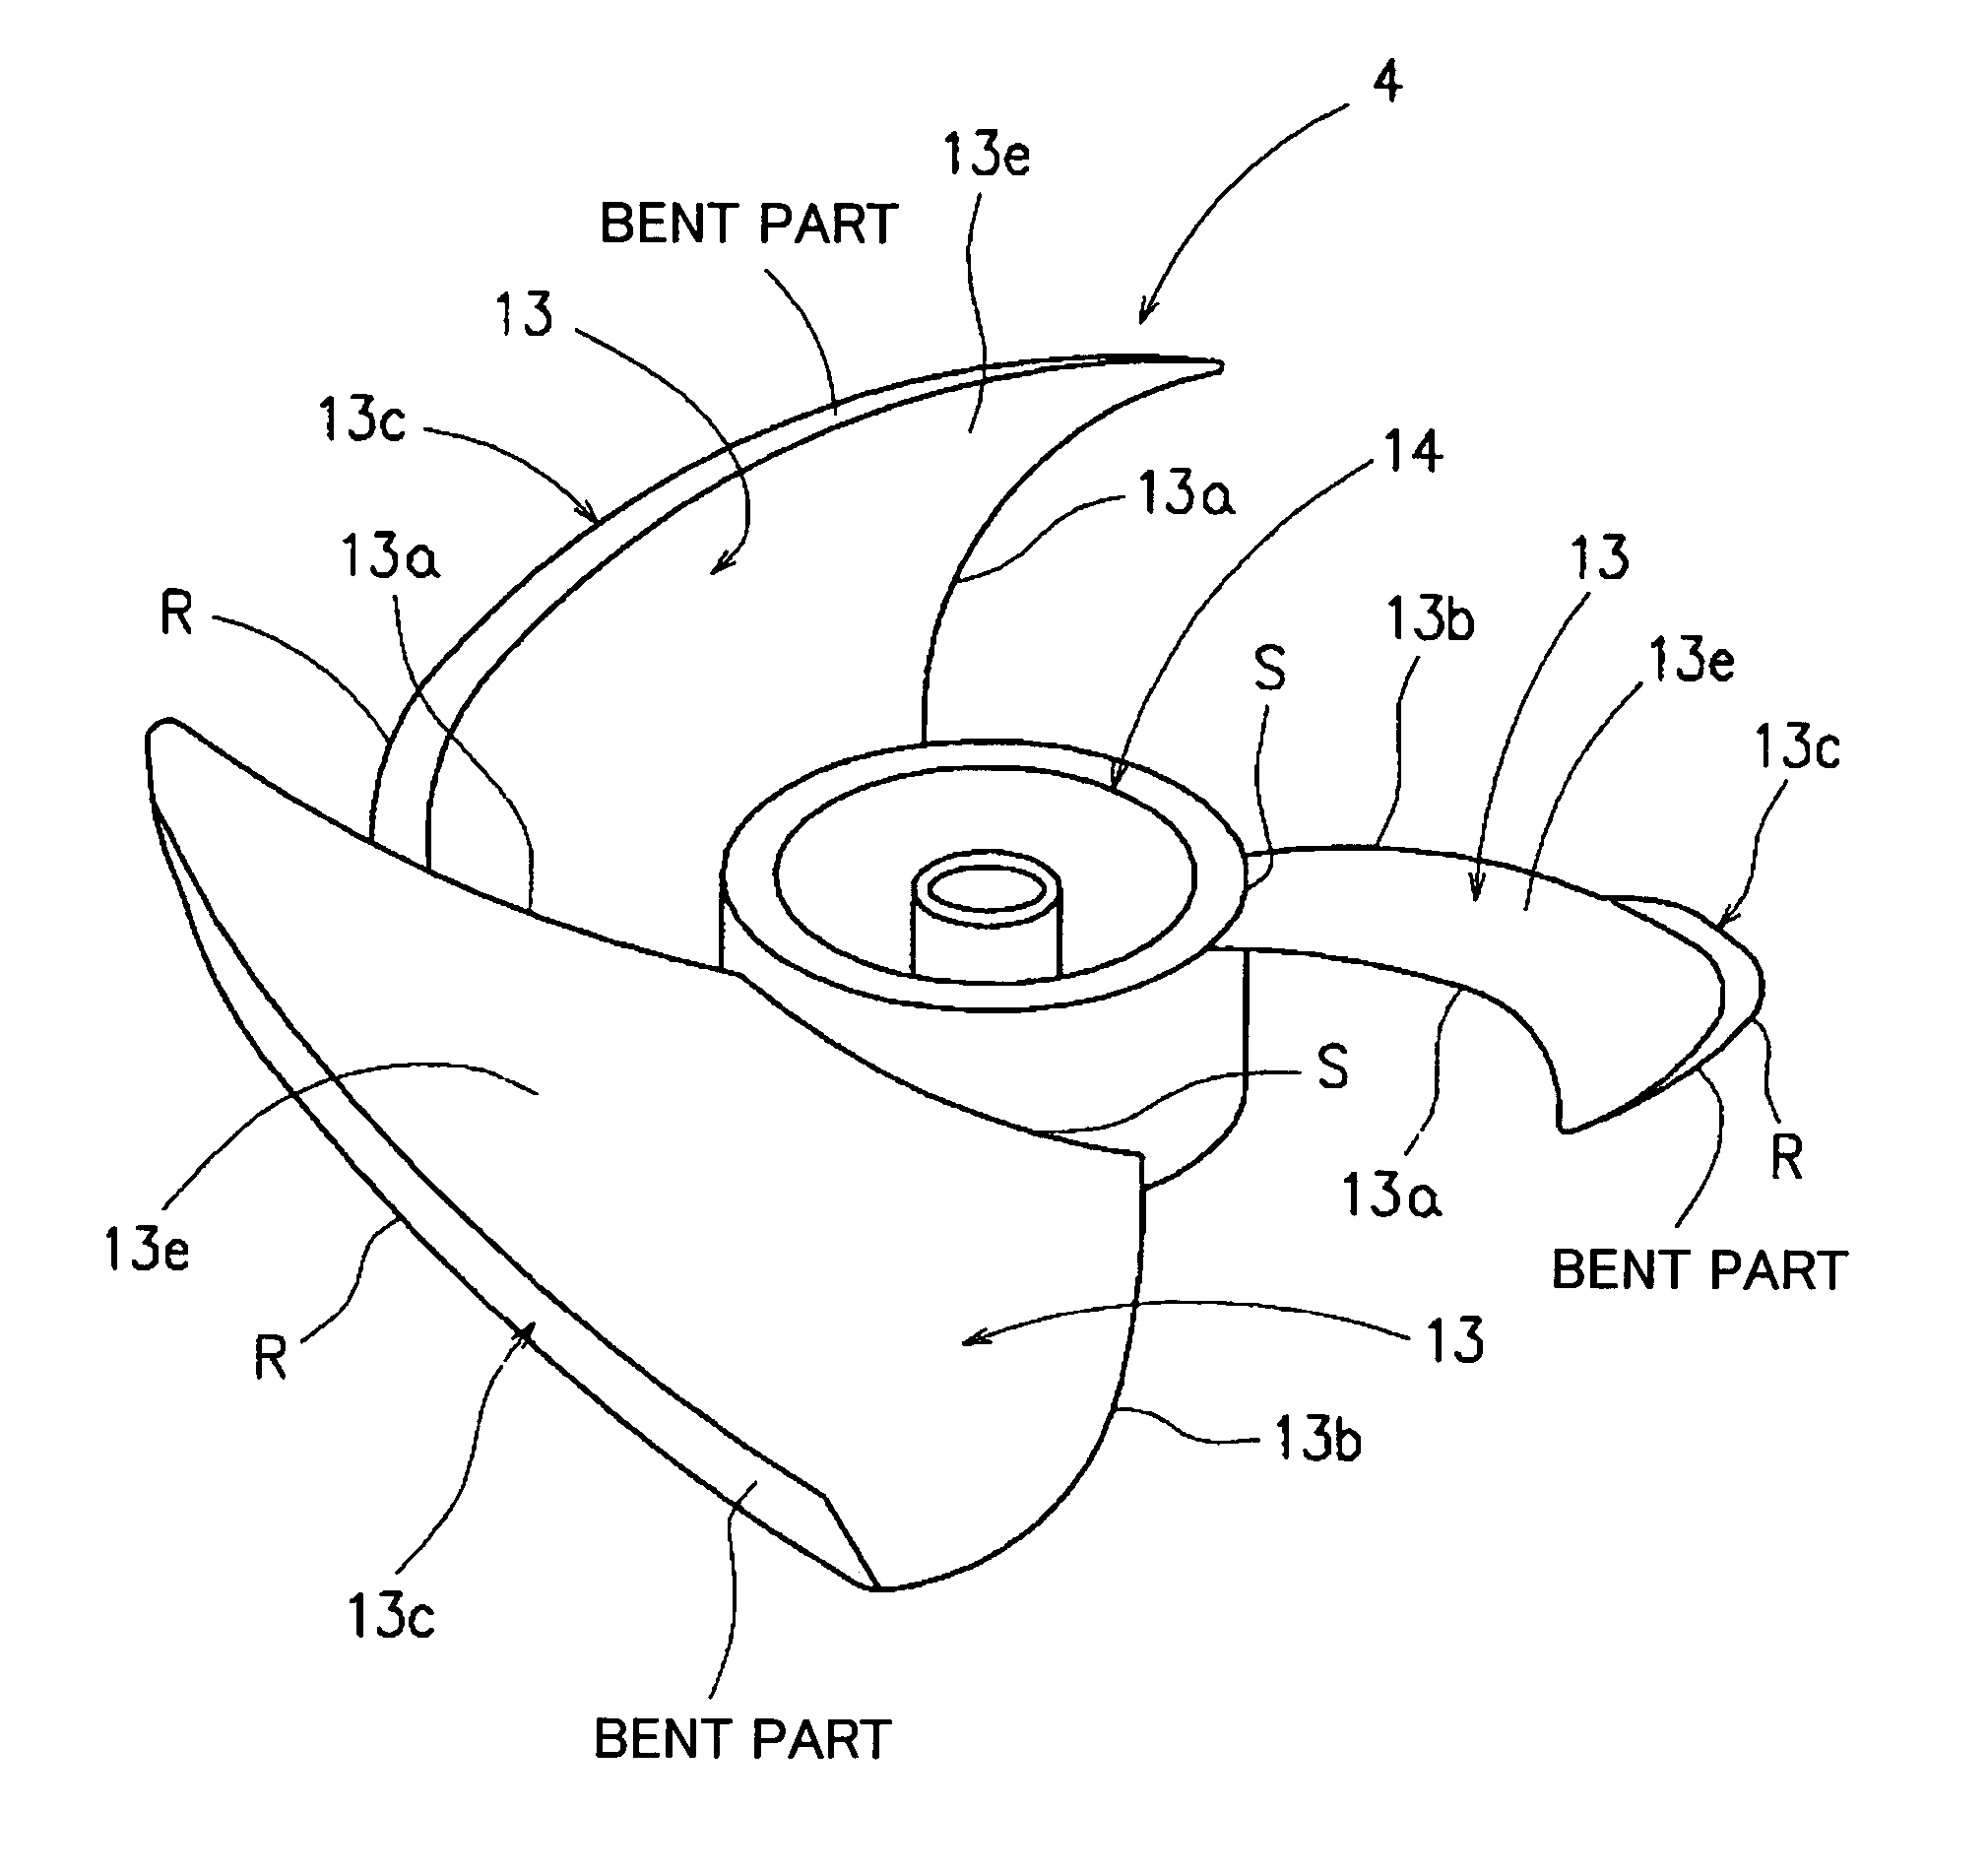 Air blower apparatus having blades with outer peripheral bends